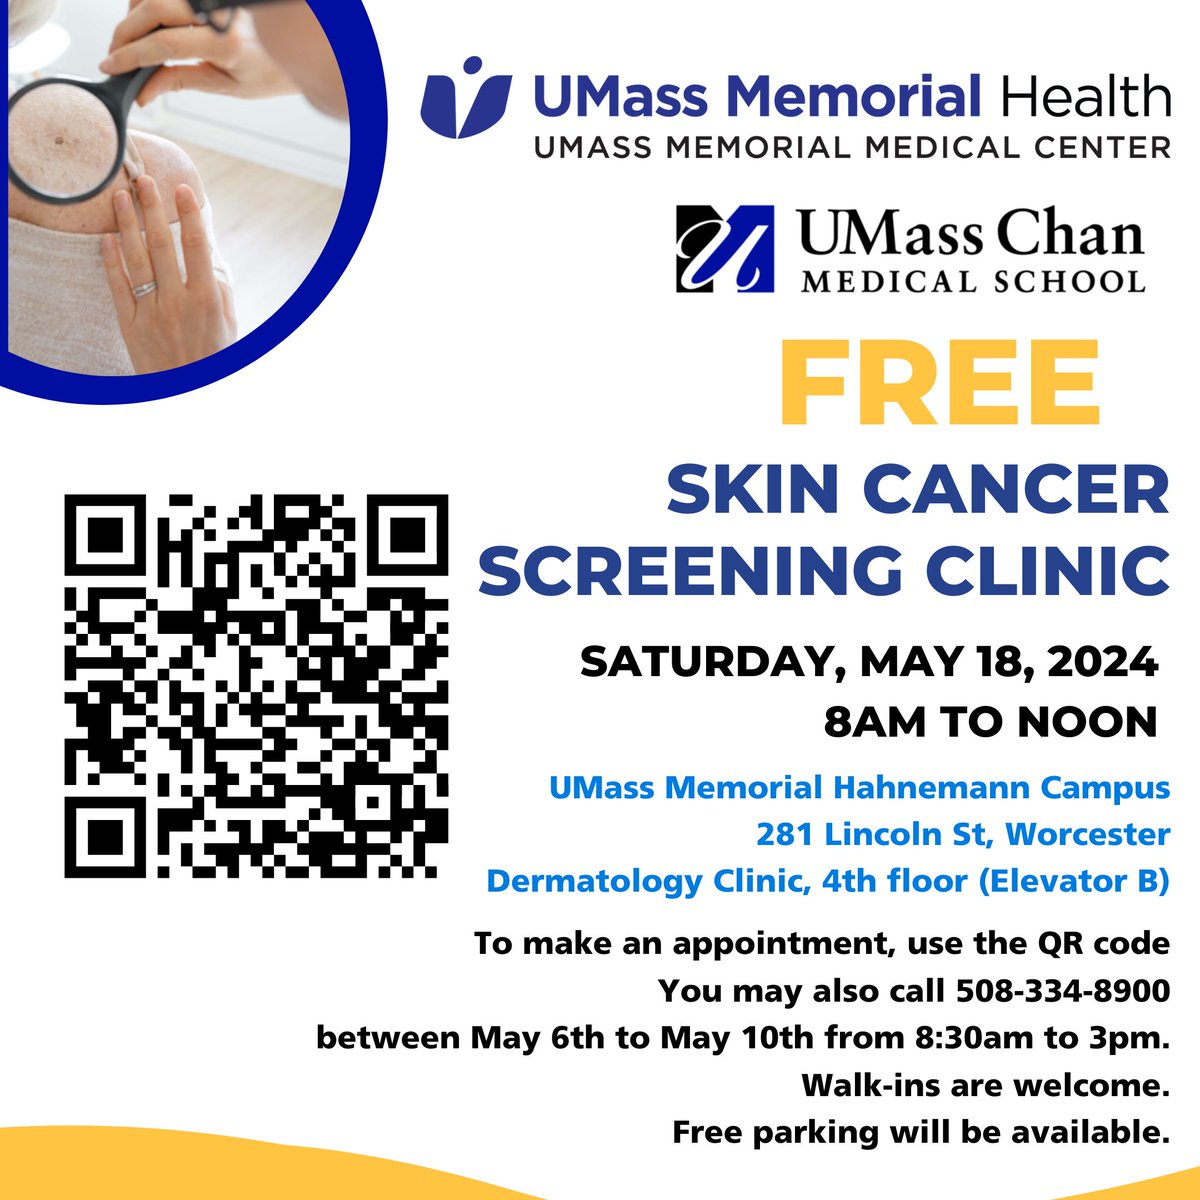 Mark your calendars! 📅 @UMassMemorial #Dermatology is offering a FREE skin screening on Saturday, May 18th. This once-a-year opportunity has been a lifesaver, identifying #skincancer in numerous patients each time. Don't miss out — early detection saves lives! #MelanomaAwareness